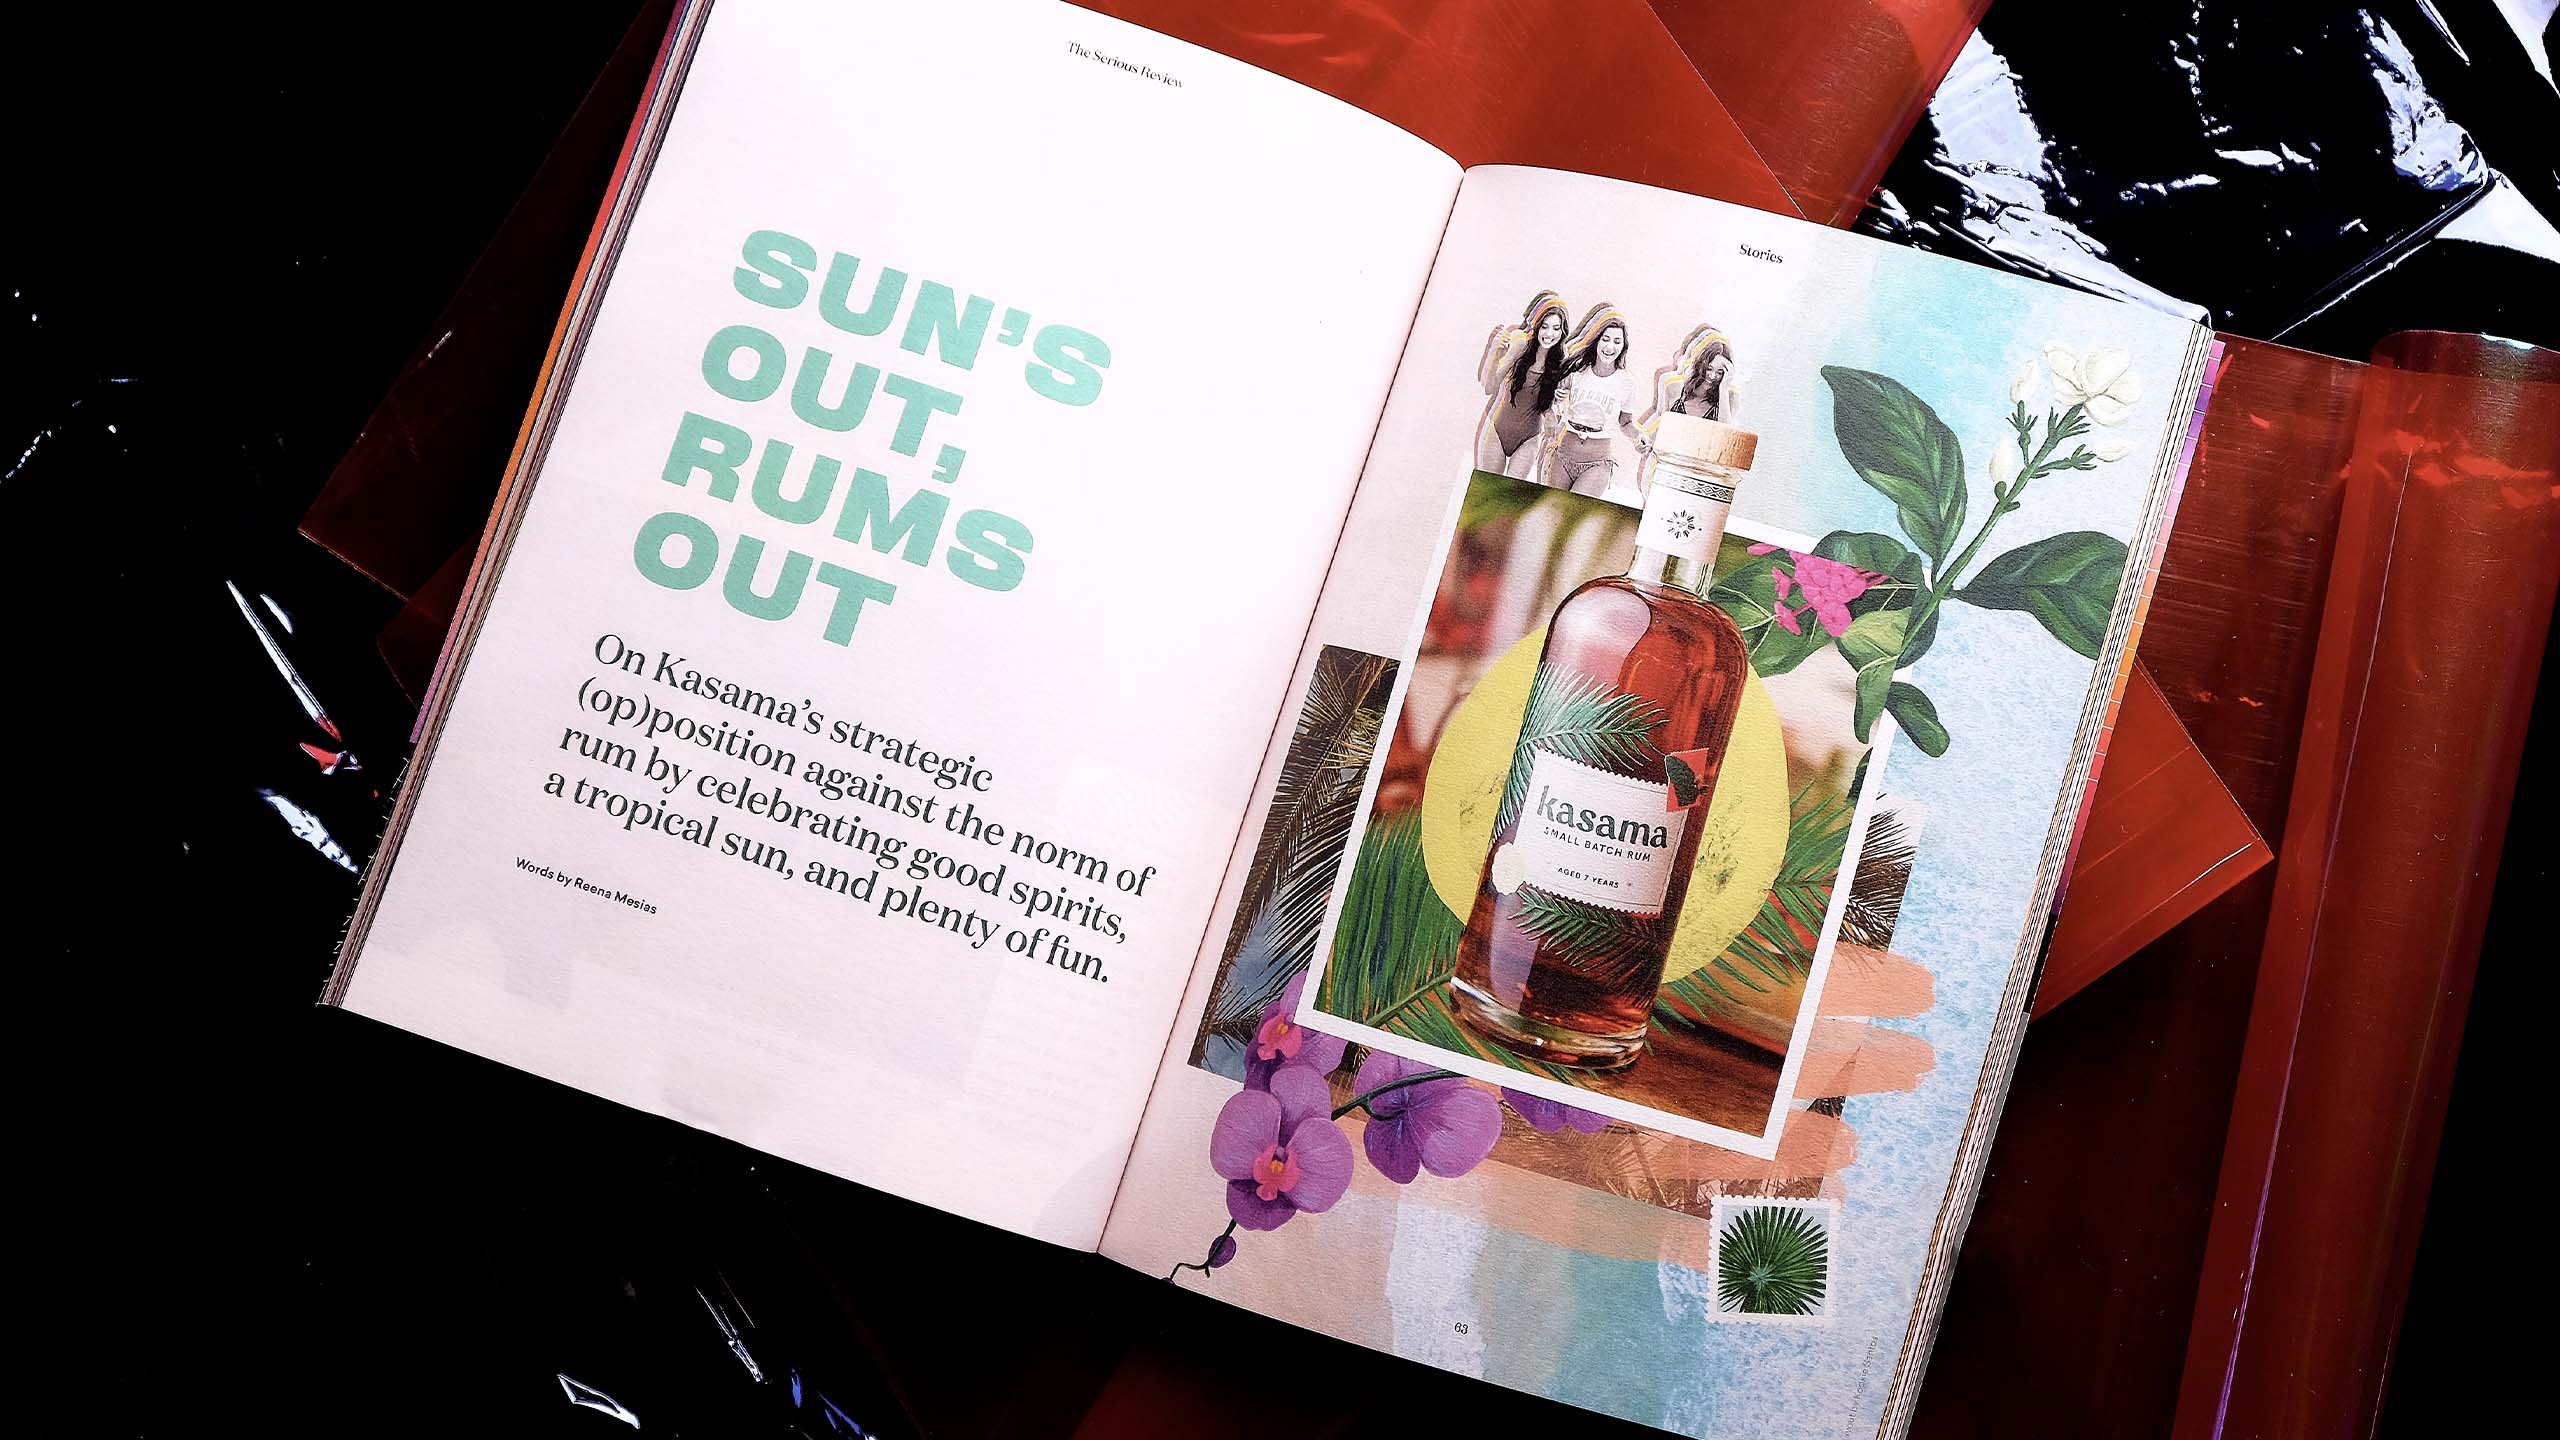 Design and branding magazine layout for The Serious Review featuring rum brand Kasama